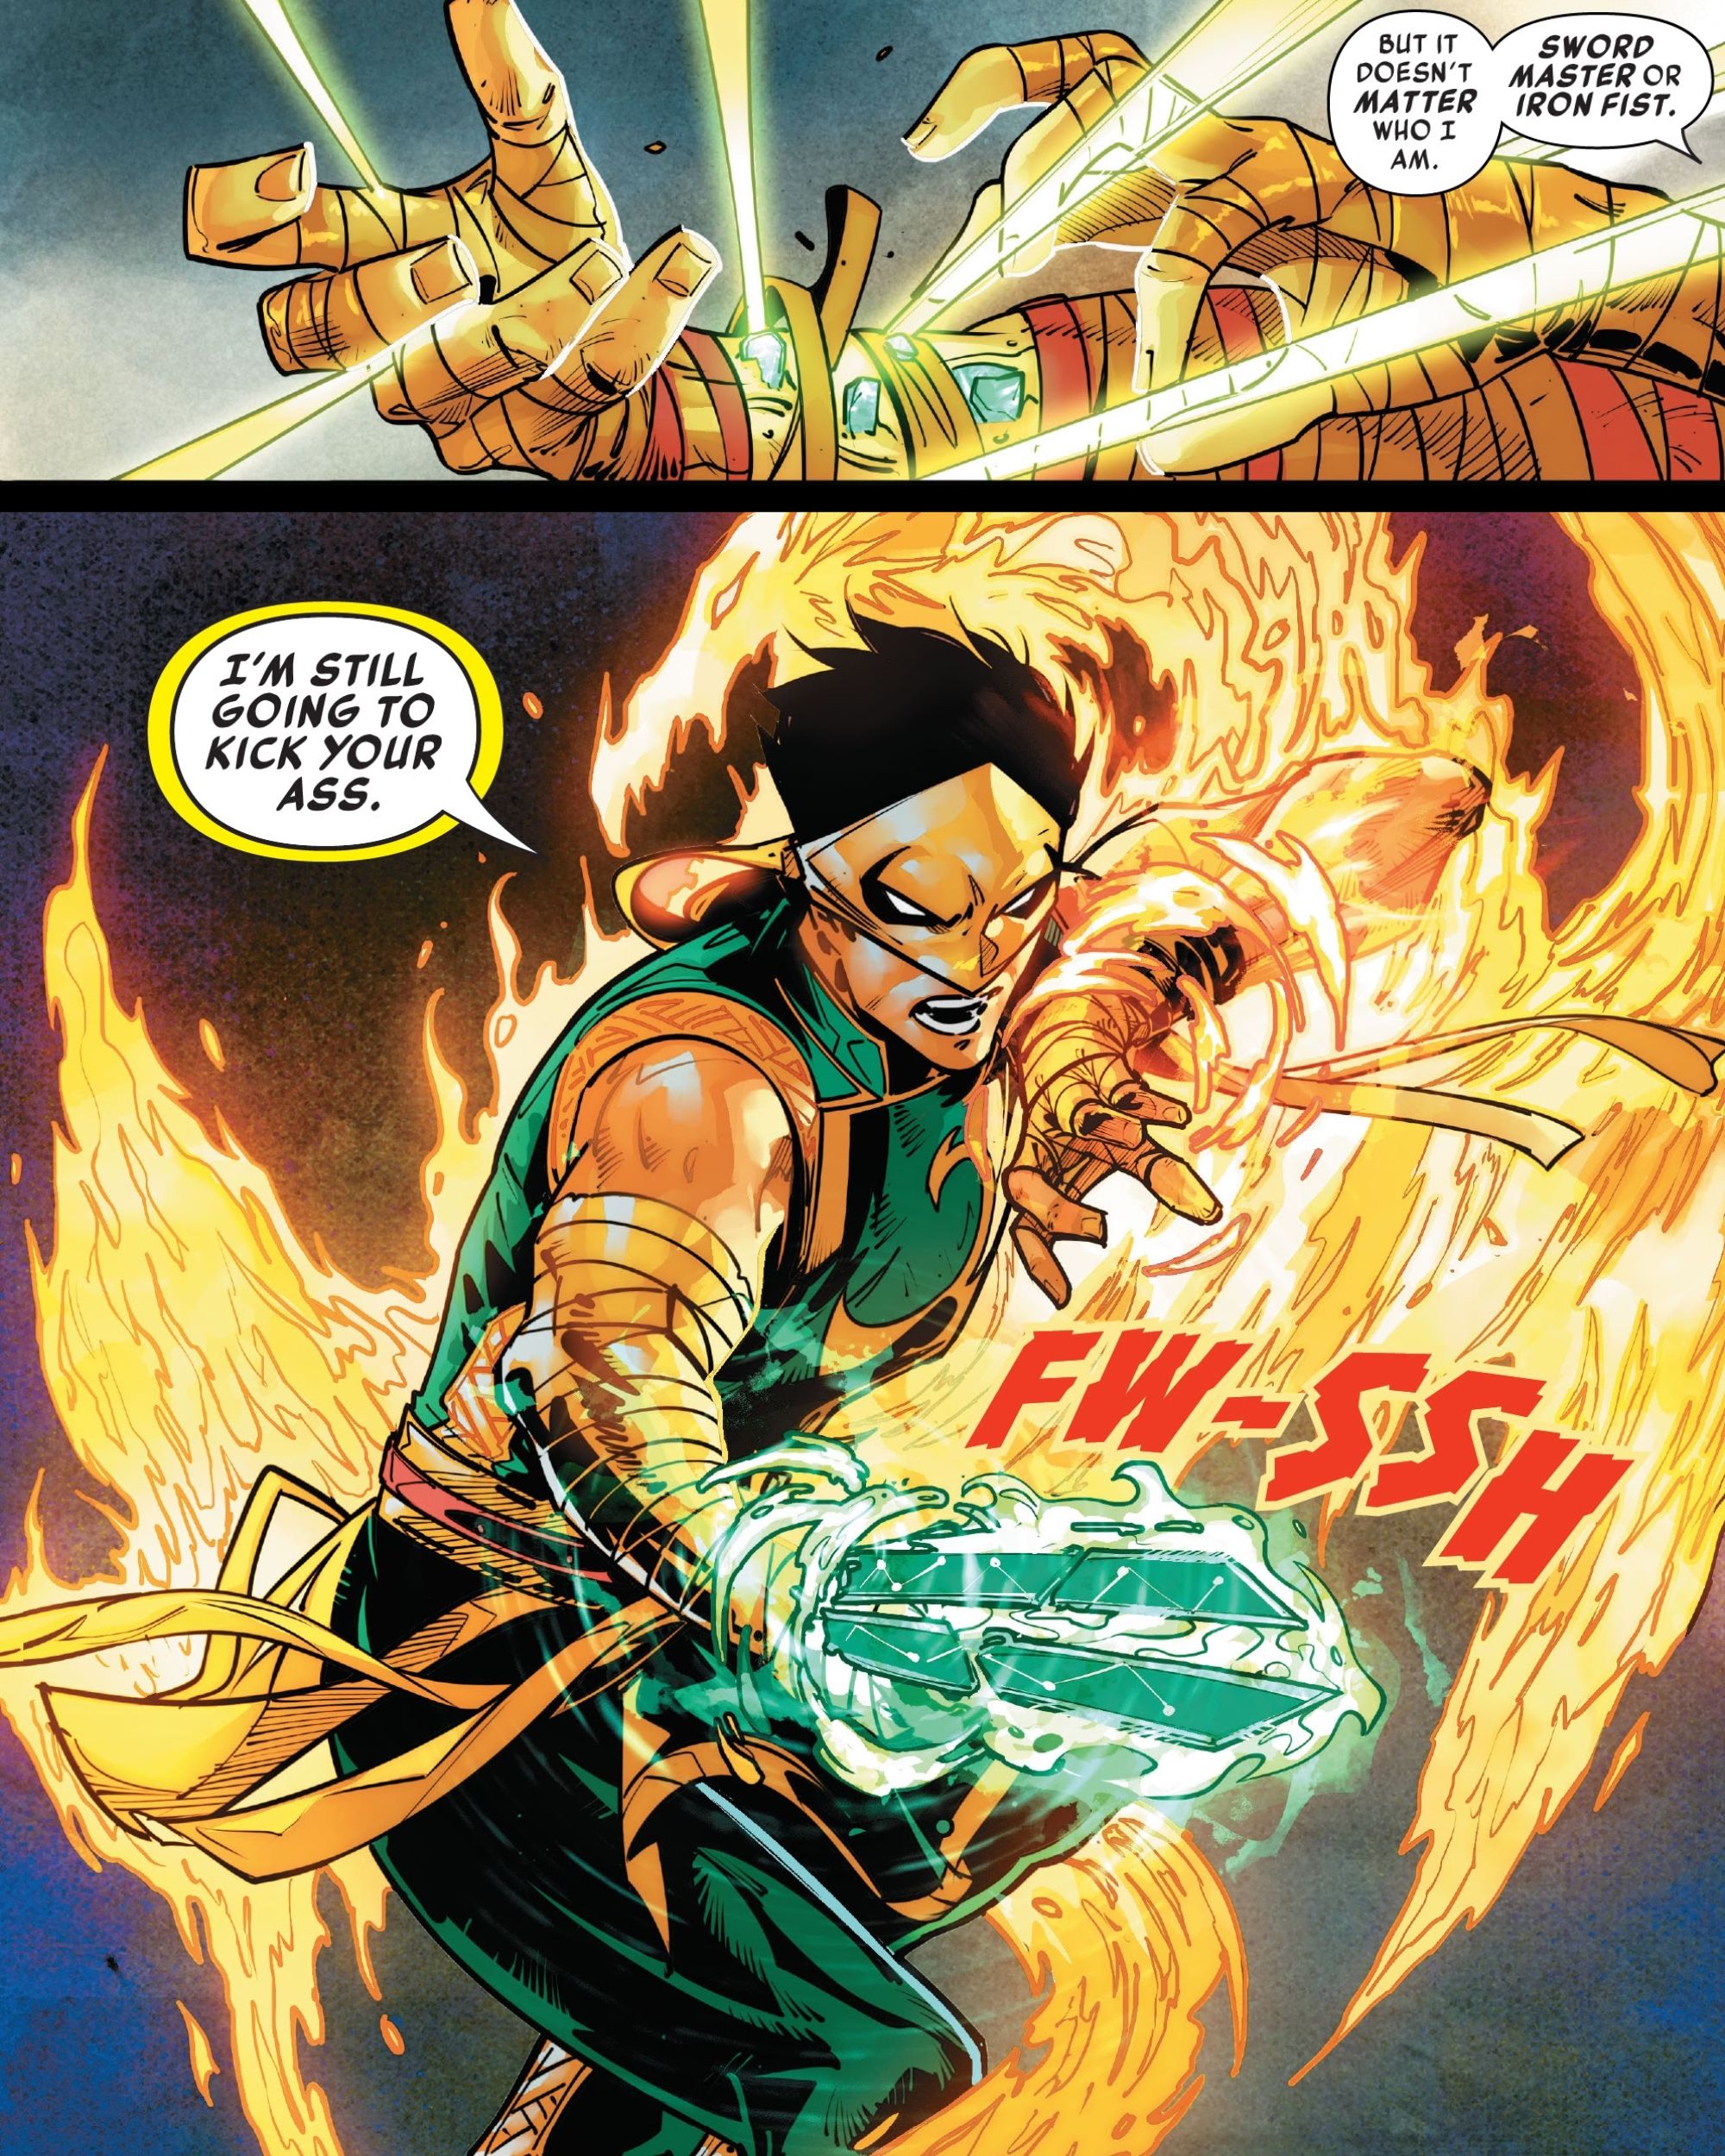 Lie Lin As Iron Fist and Sword Master